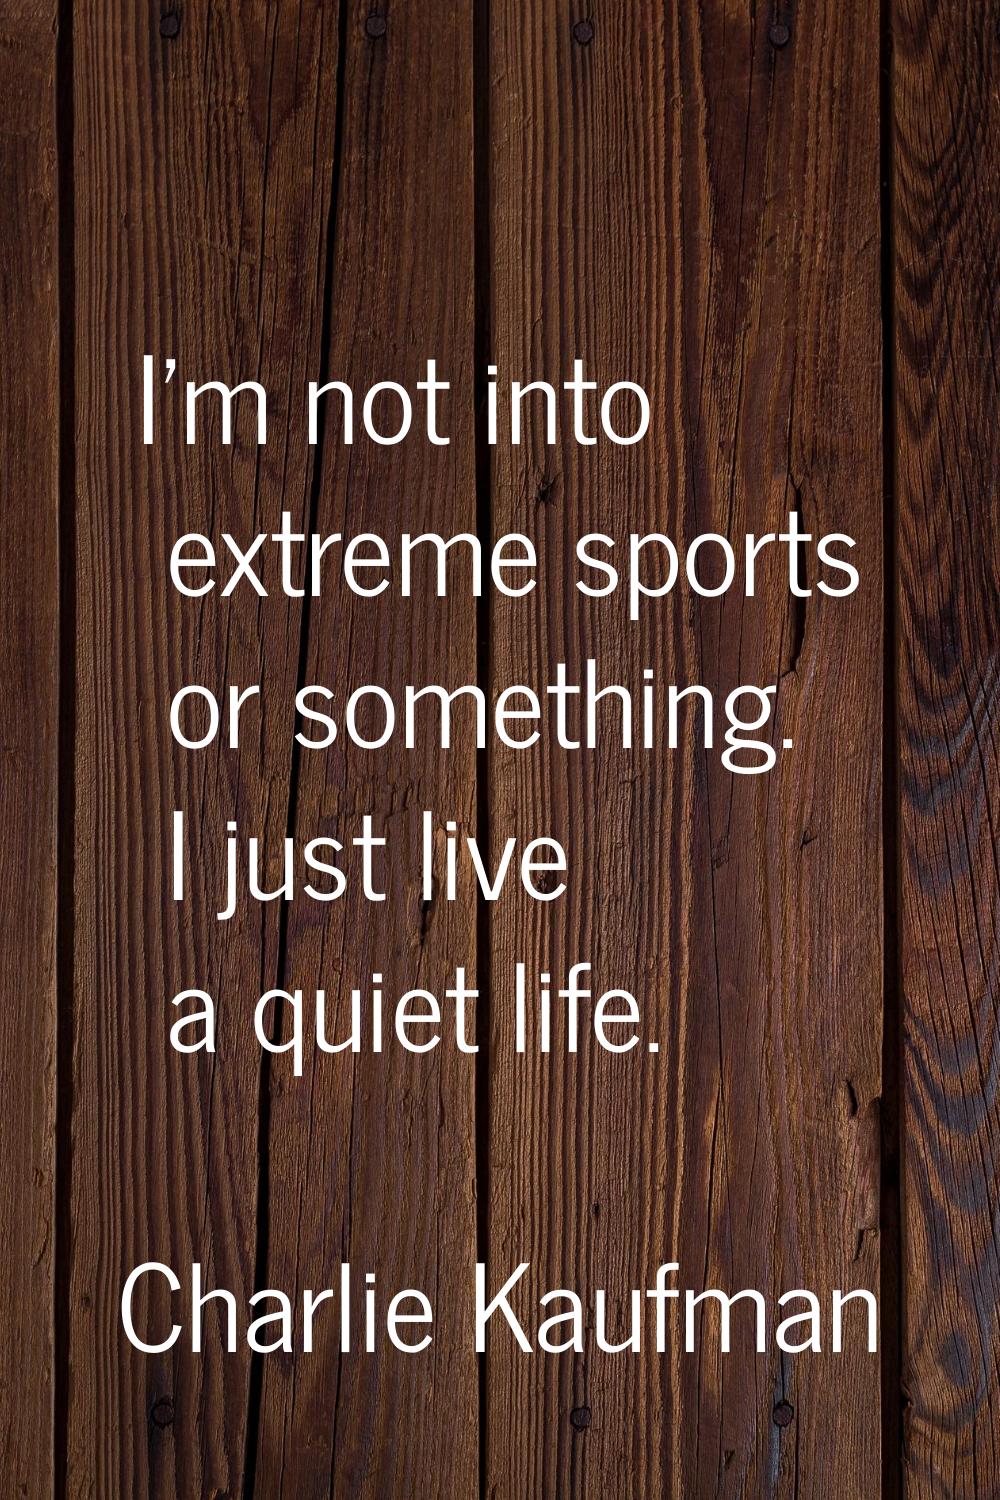 I'm not into extreme sports or something. I just live a quiet life.